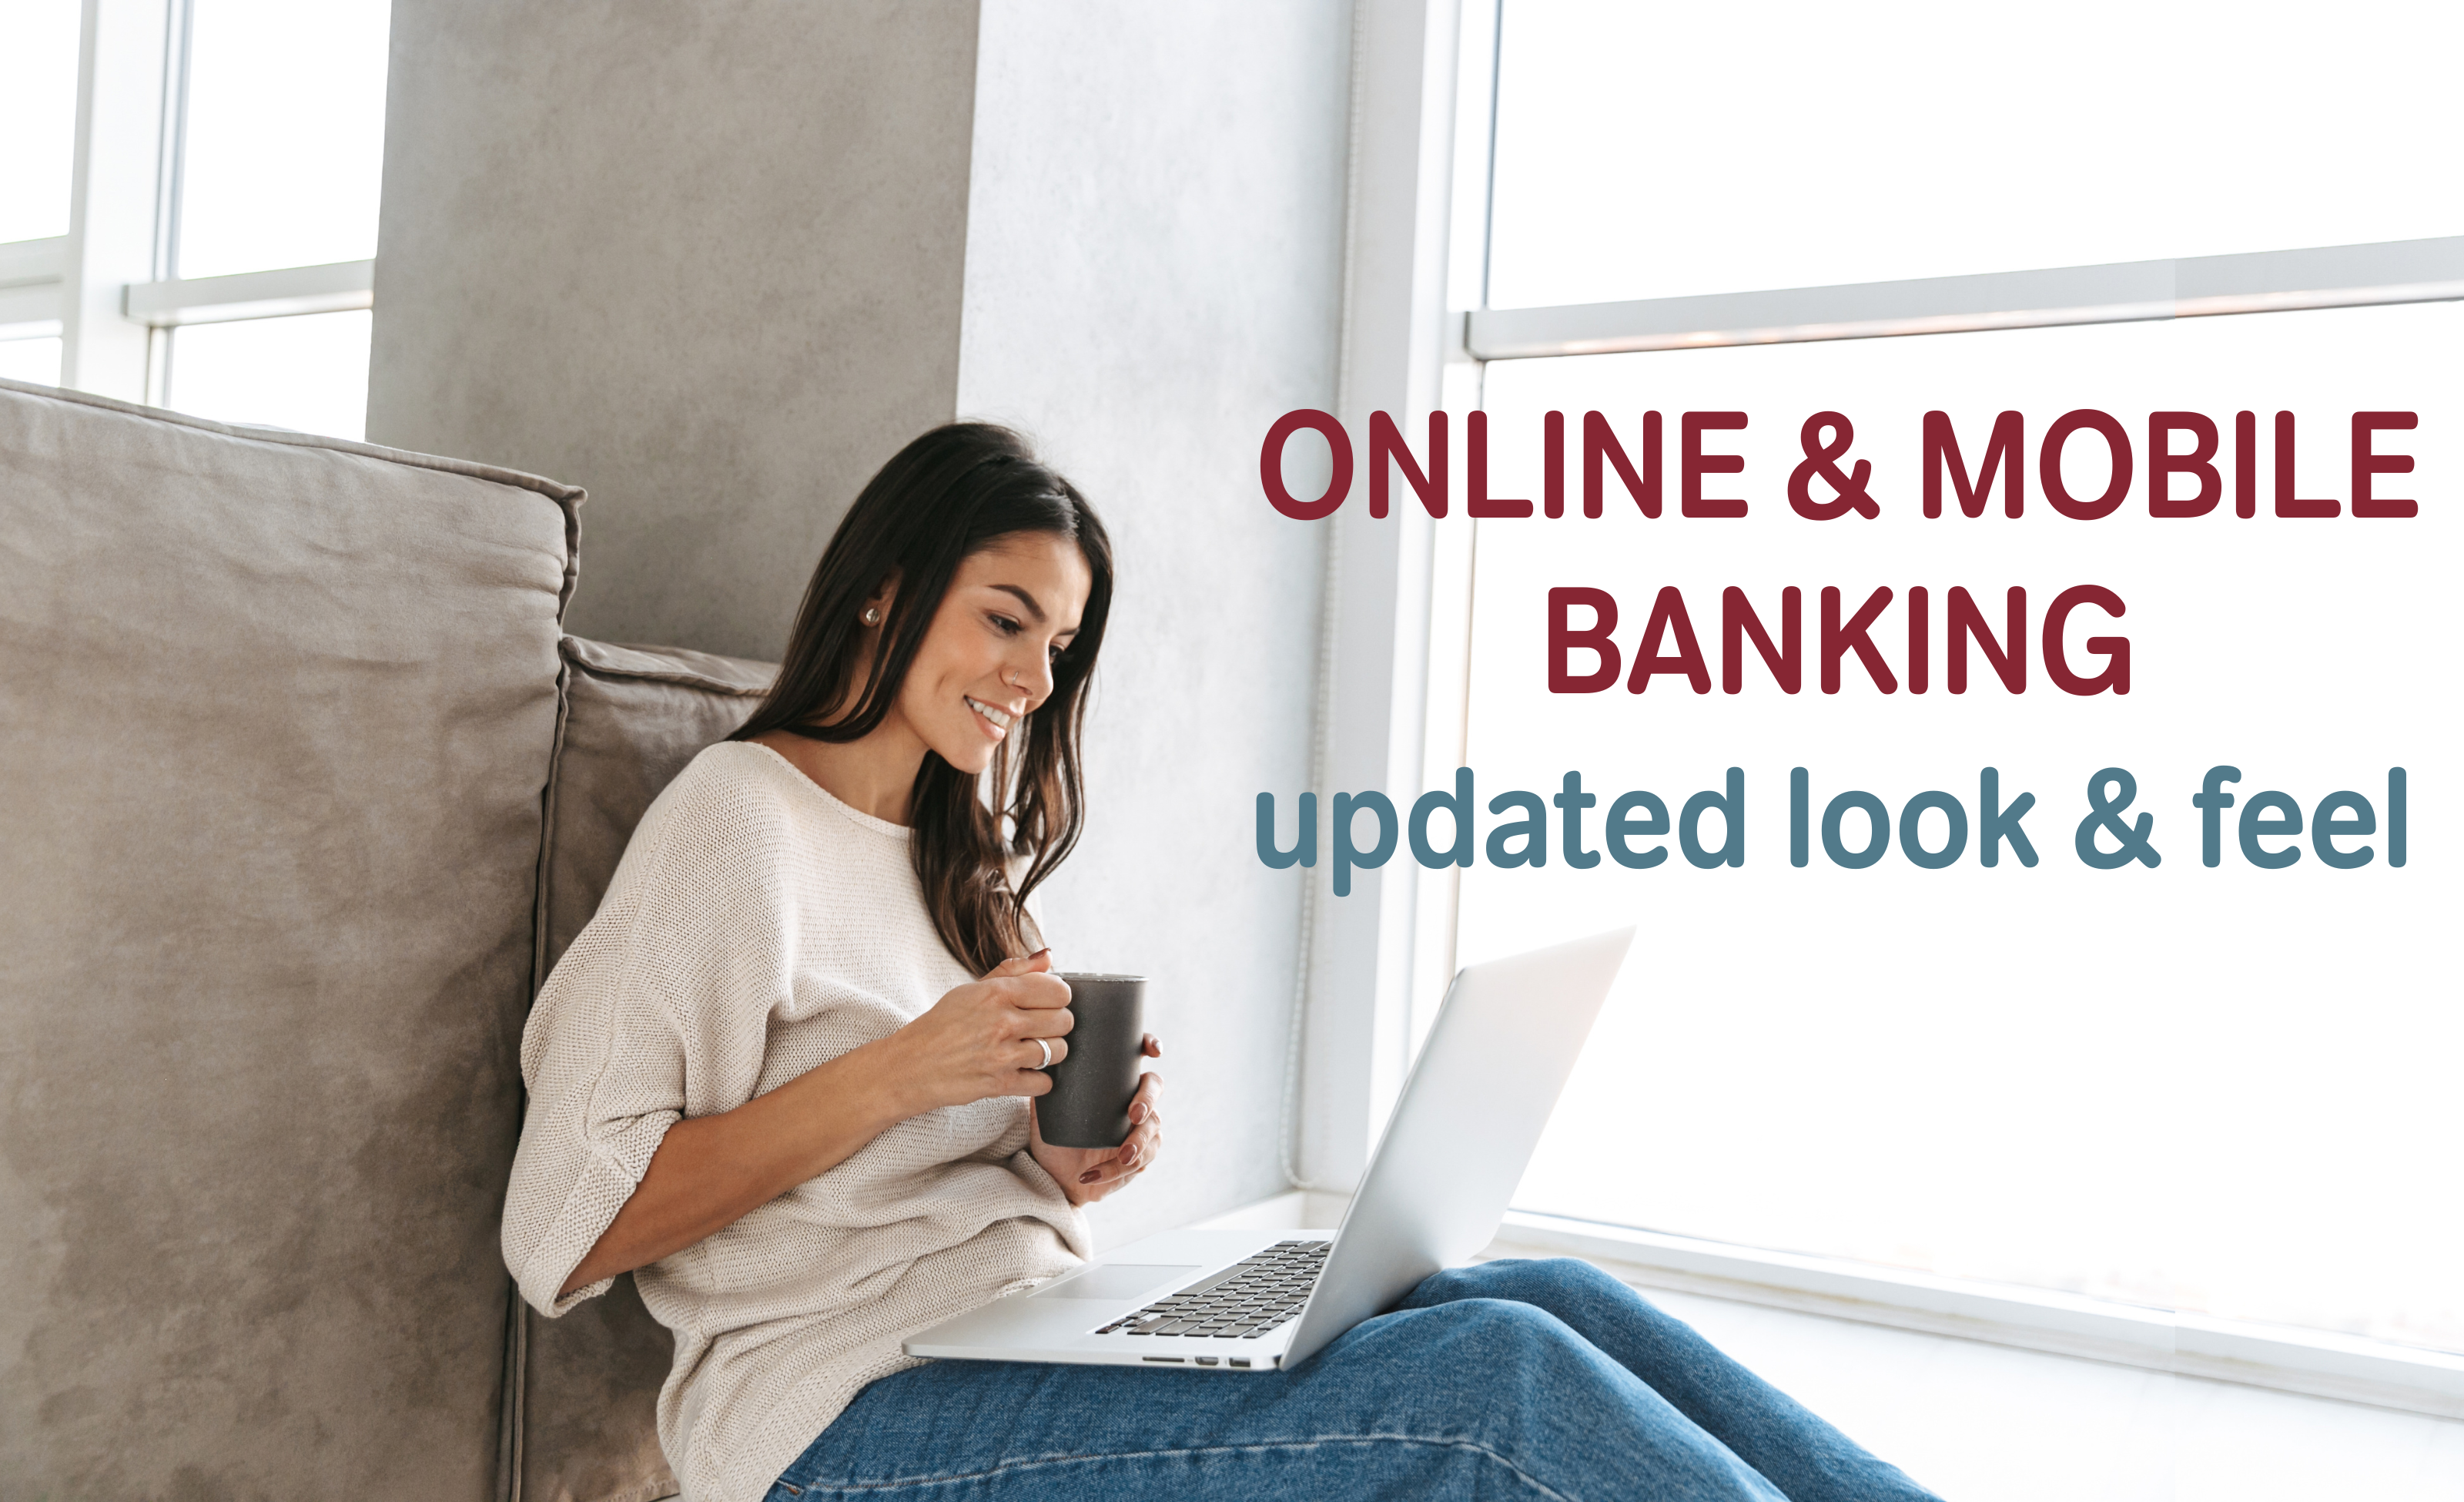 Online & Mobile Banking: Updated Look & Feel